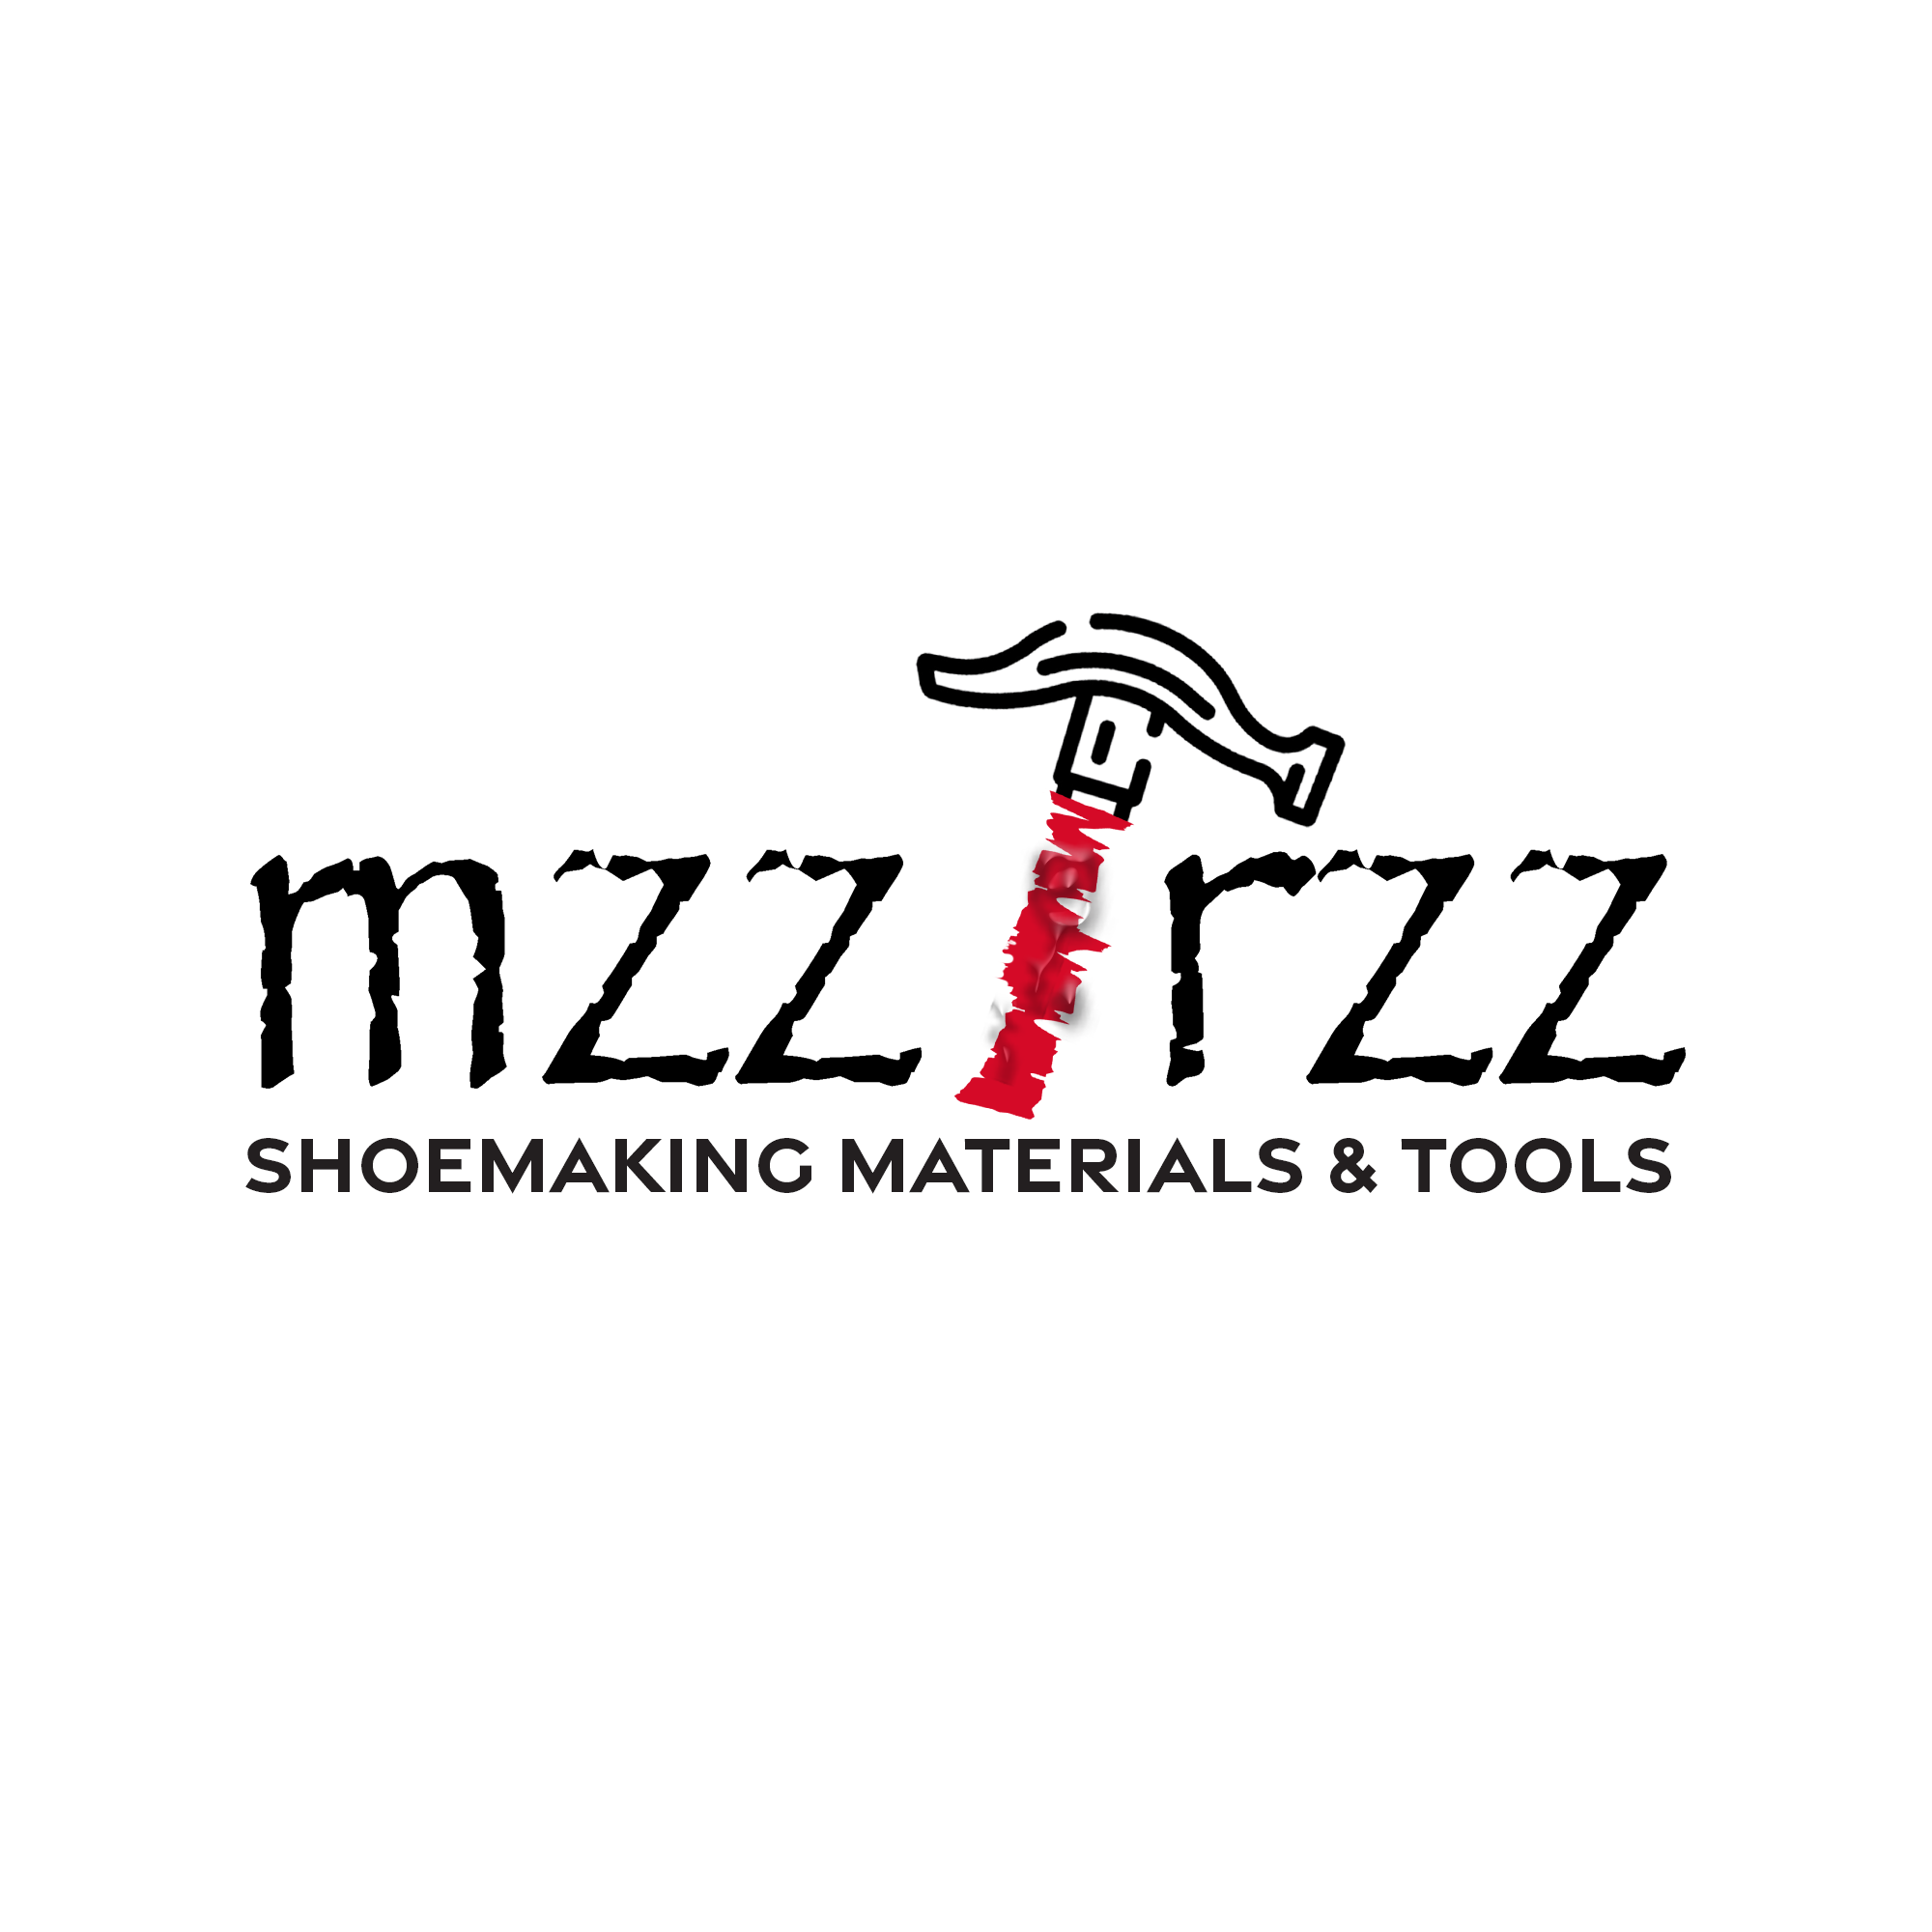 Leather Care - Lincoln - Leather Dye – mzz T rzz Shoemaking Materials